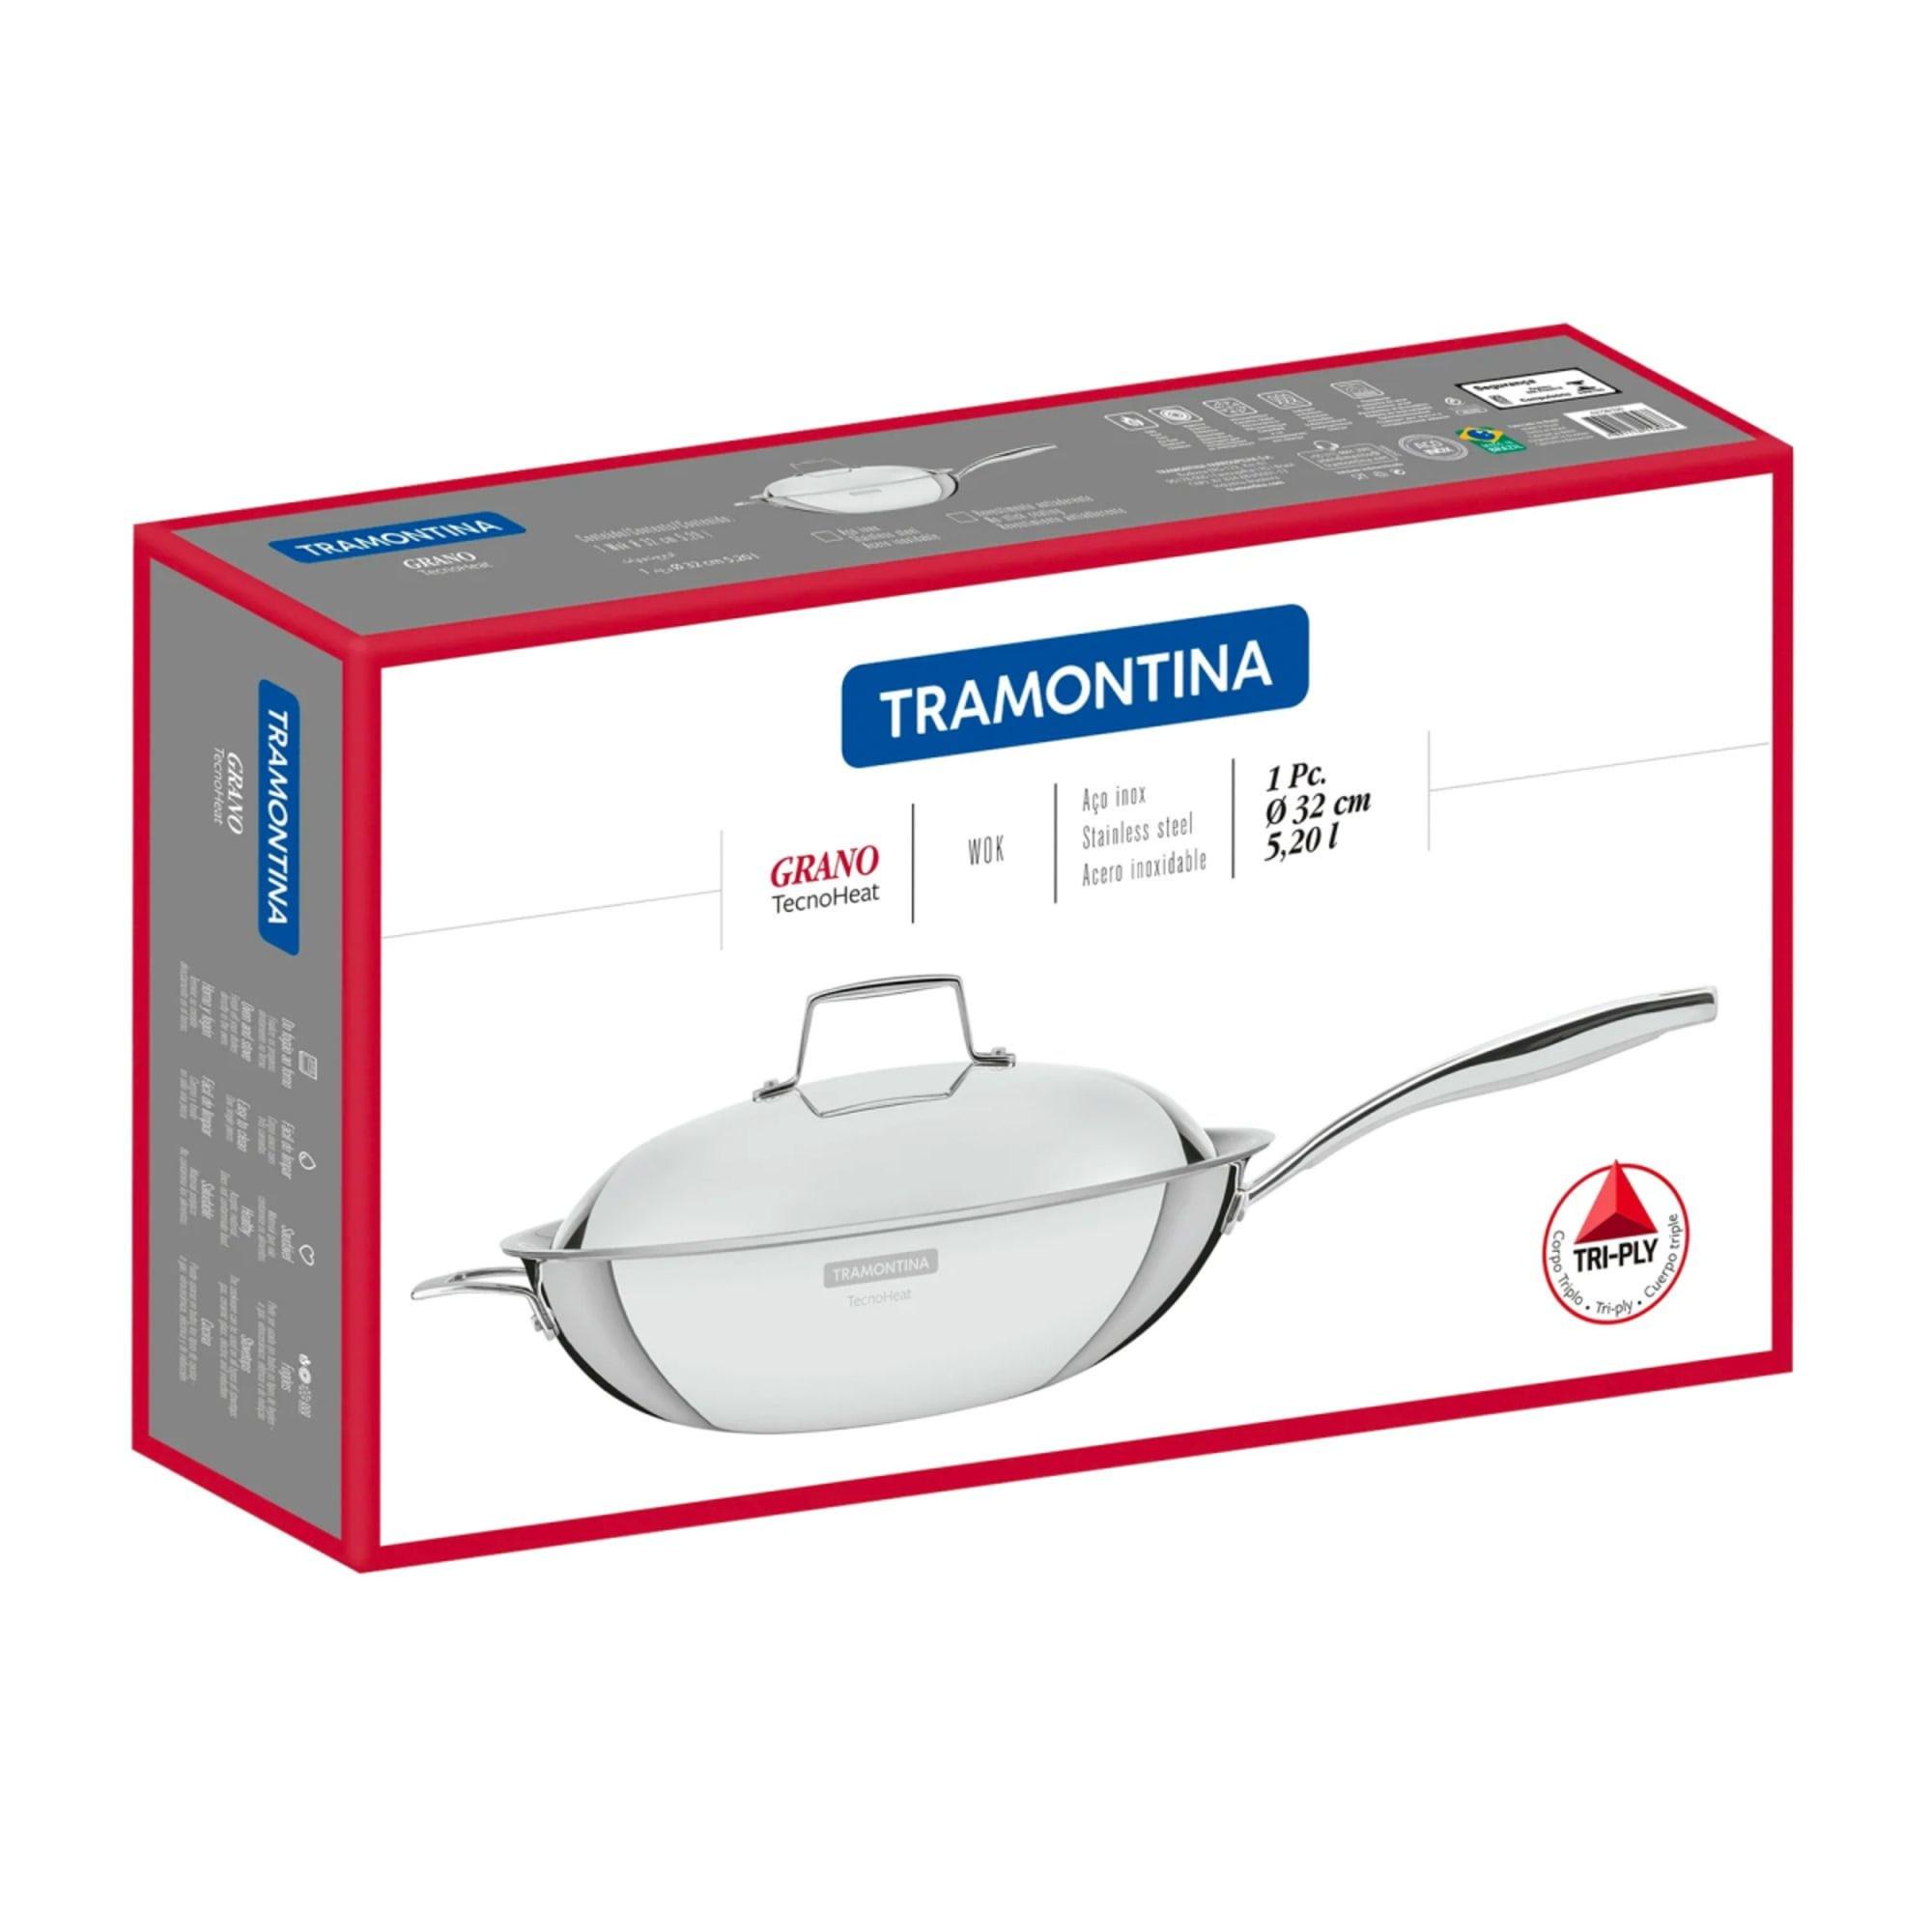 Tramontina Grano Collection Stainless Steel Wok 32cm Image 3